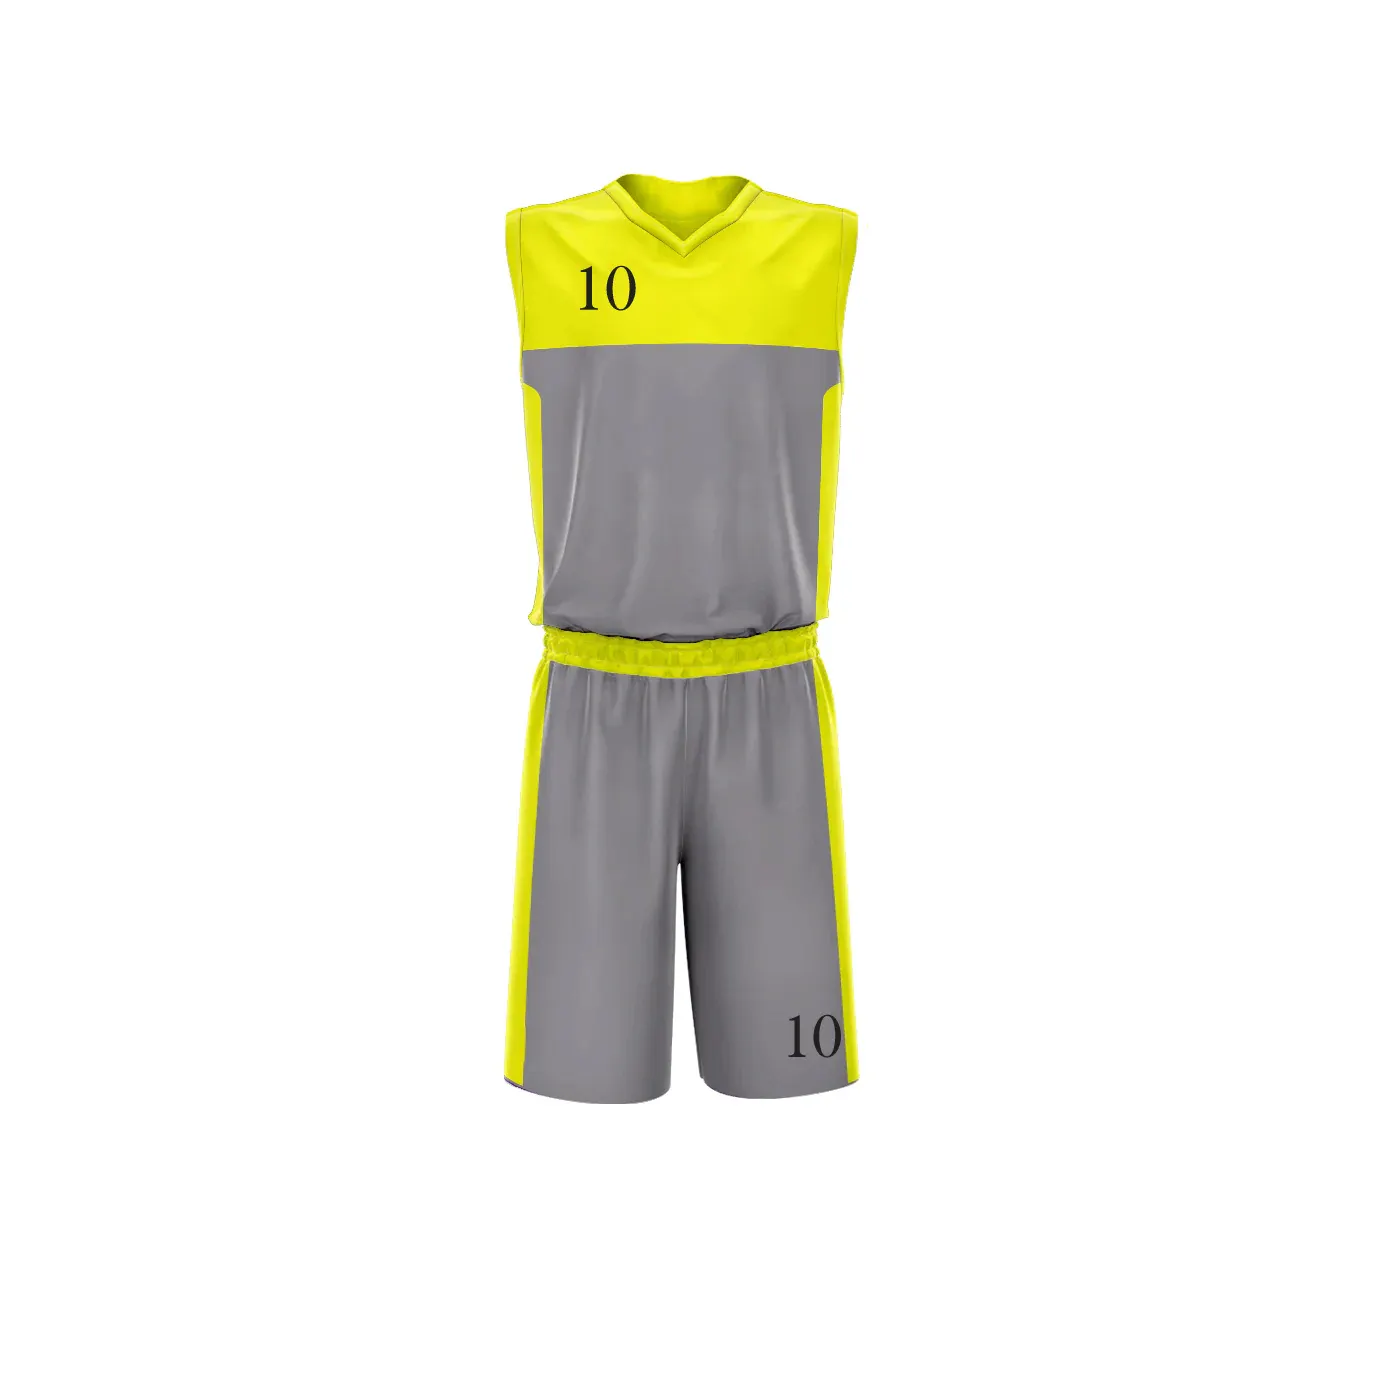 Full Sublimation Printing Basketball Uniform Sleeveless in Solid Color Basketball Uniform with Custom Printing